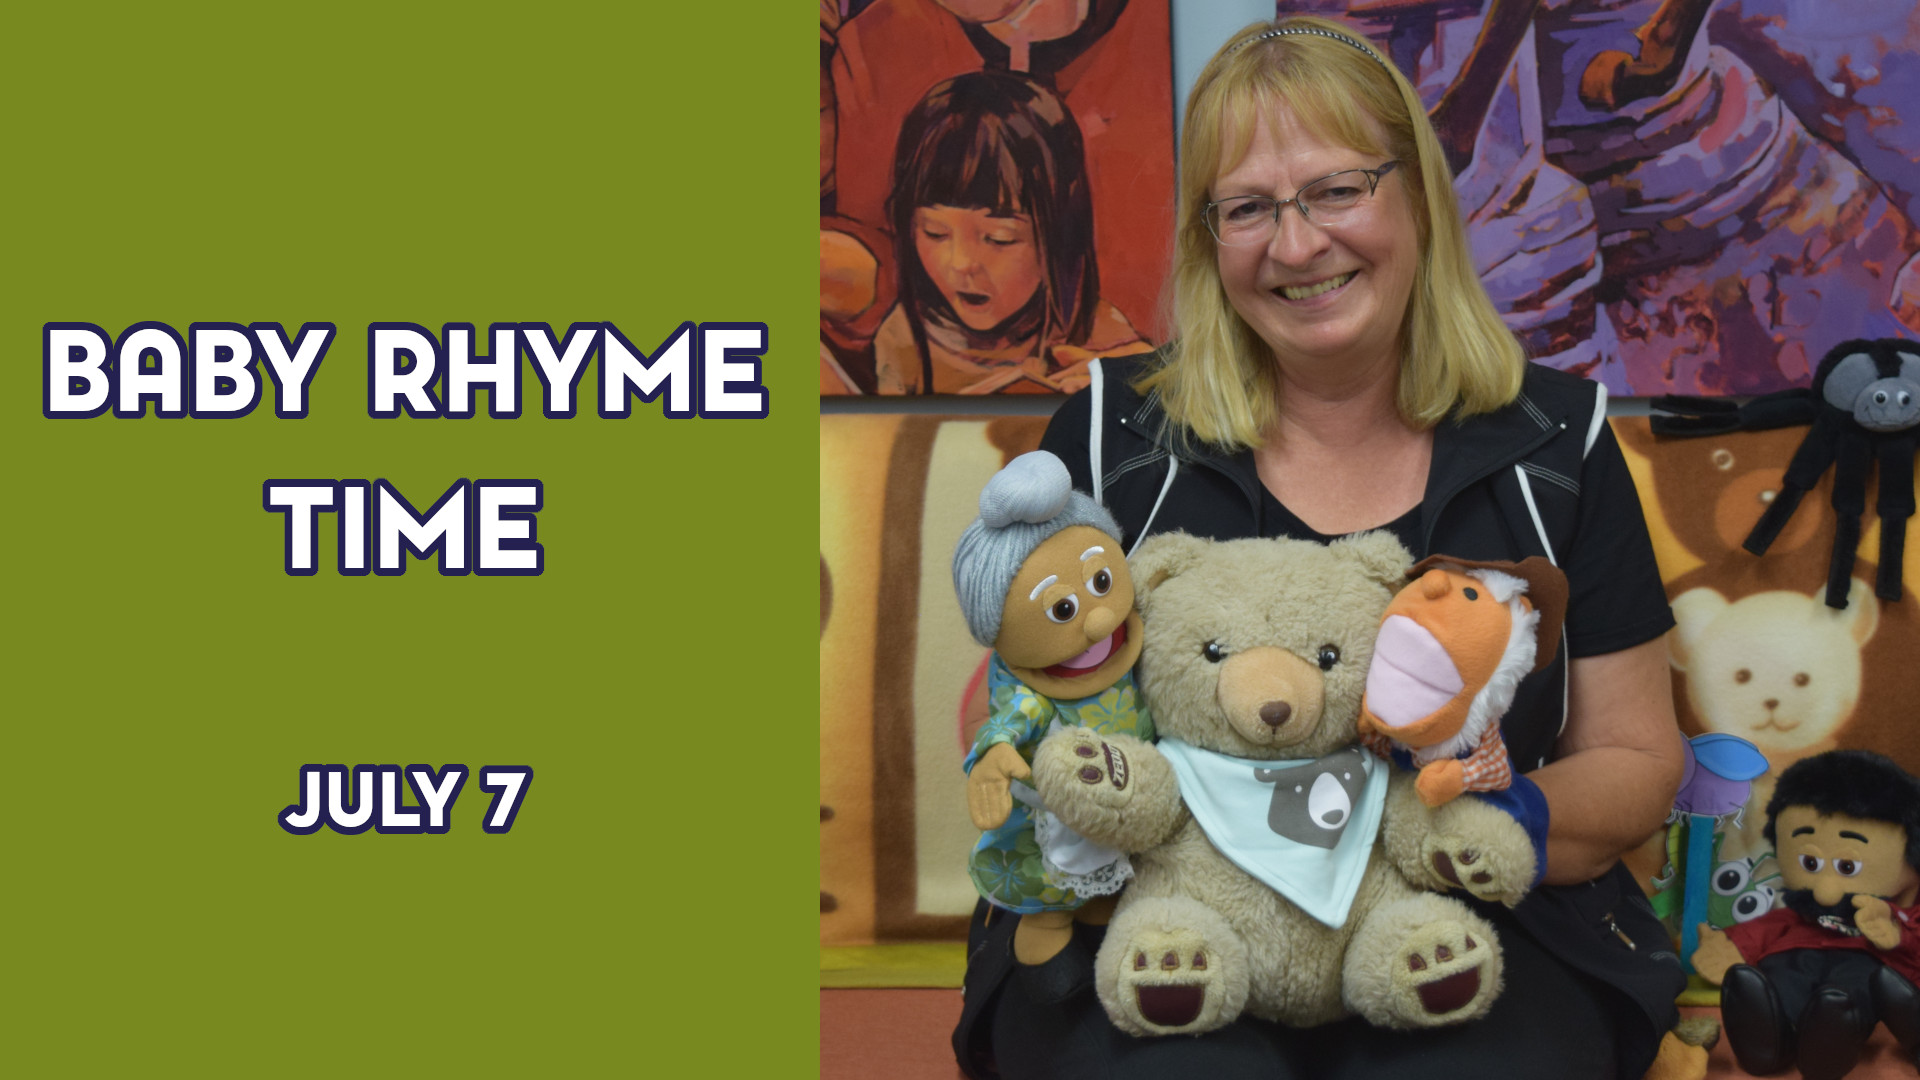 A woman holds stuffed animals next to the text "Baby Rhyme Time July 7"